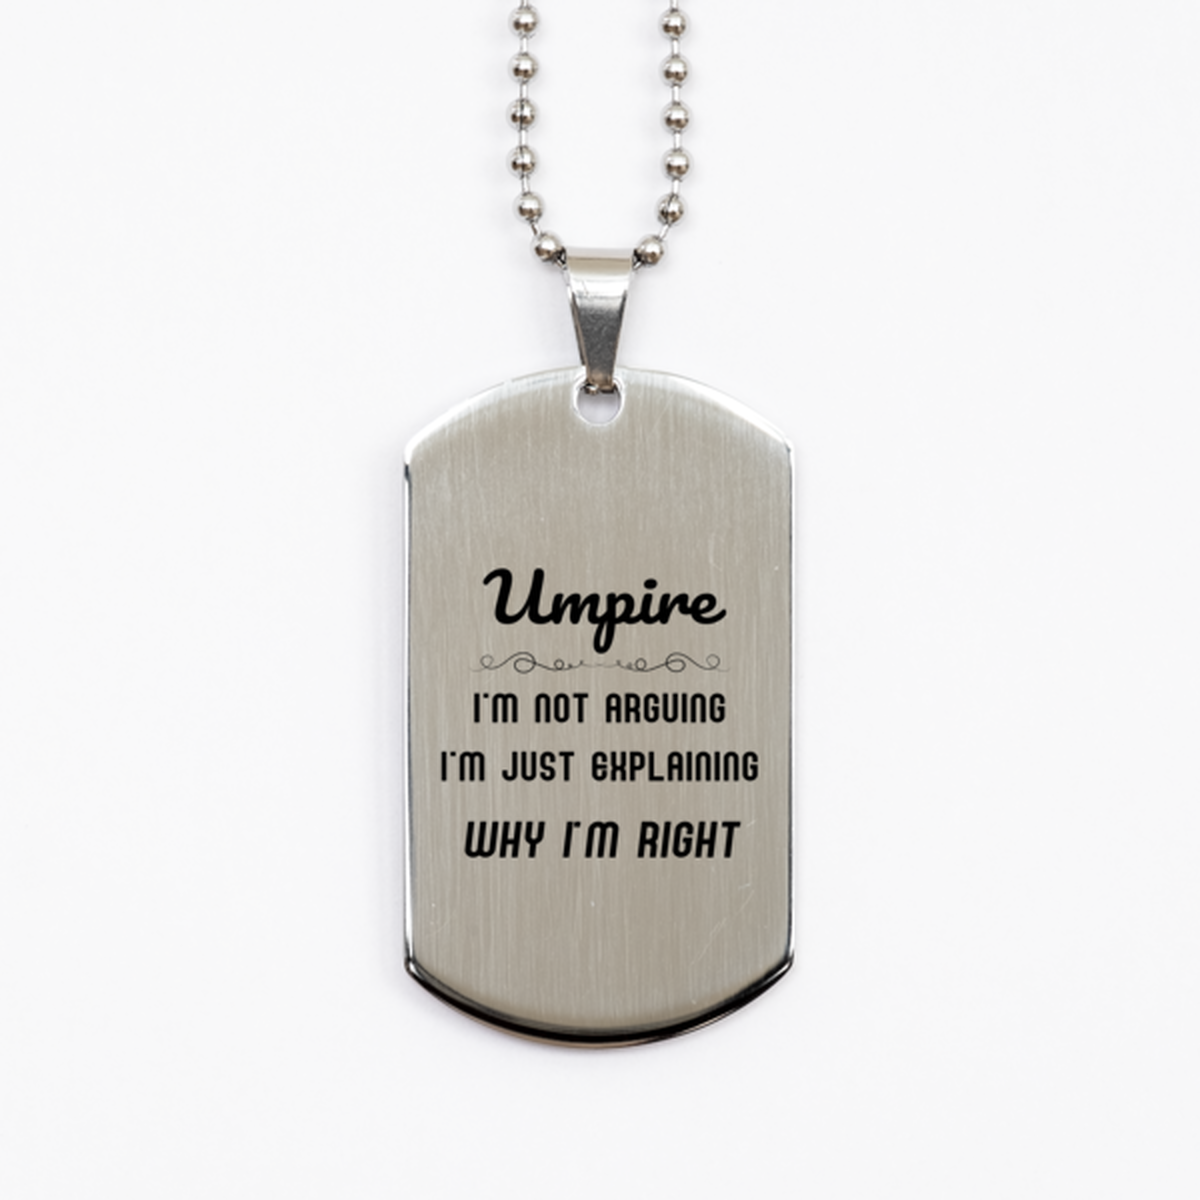 Umpire I'm not Arguing. I'm Just Explaining Why I'm RIGHT Silver Dog Tag, Funny Saying Quote Umpire Gifts For Umpire Graduation Birthday Christmas Gifts for Men Women Coworker